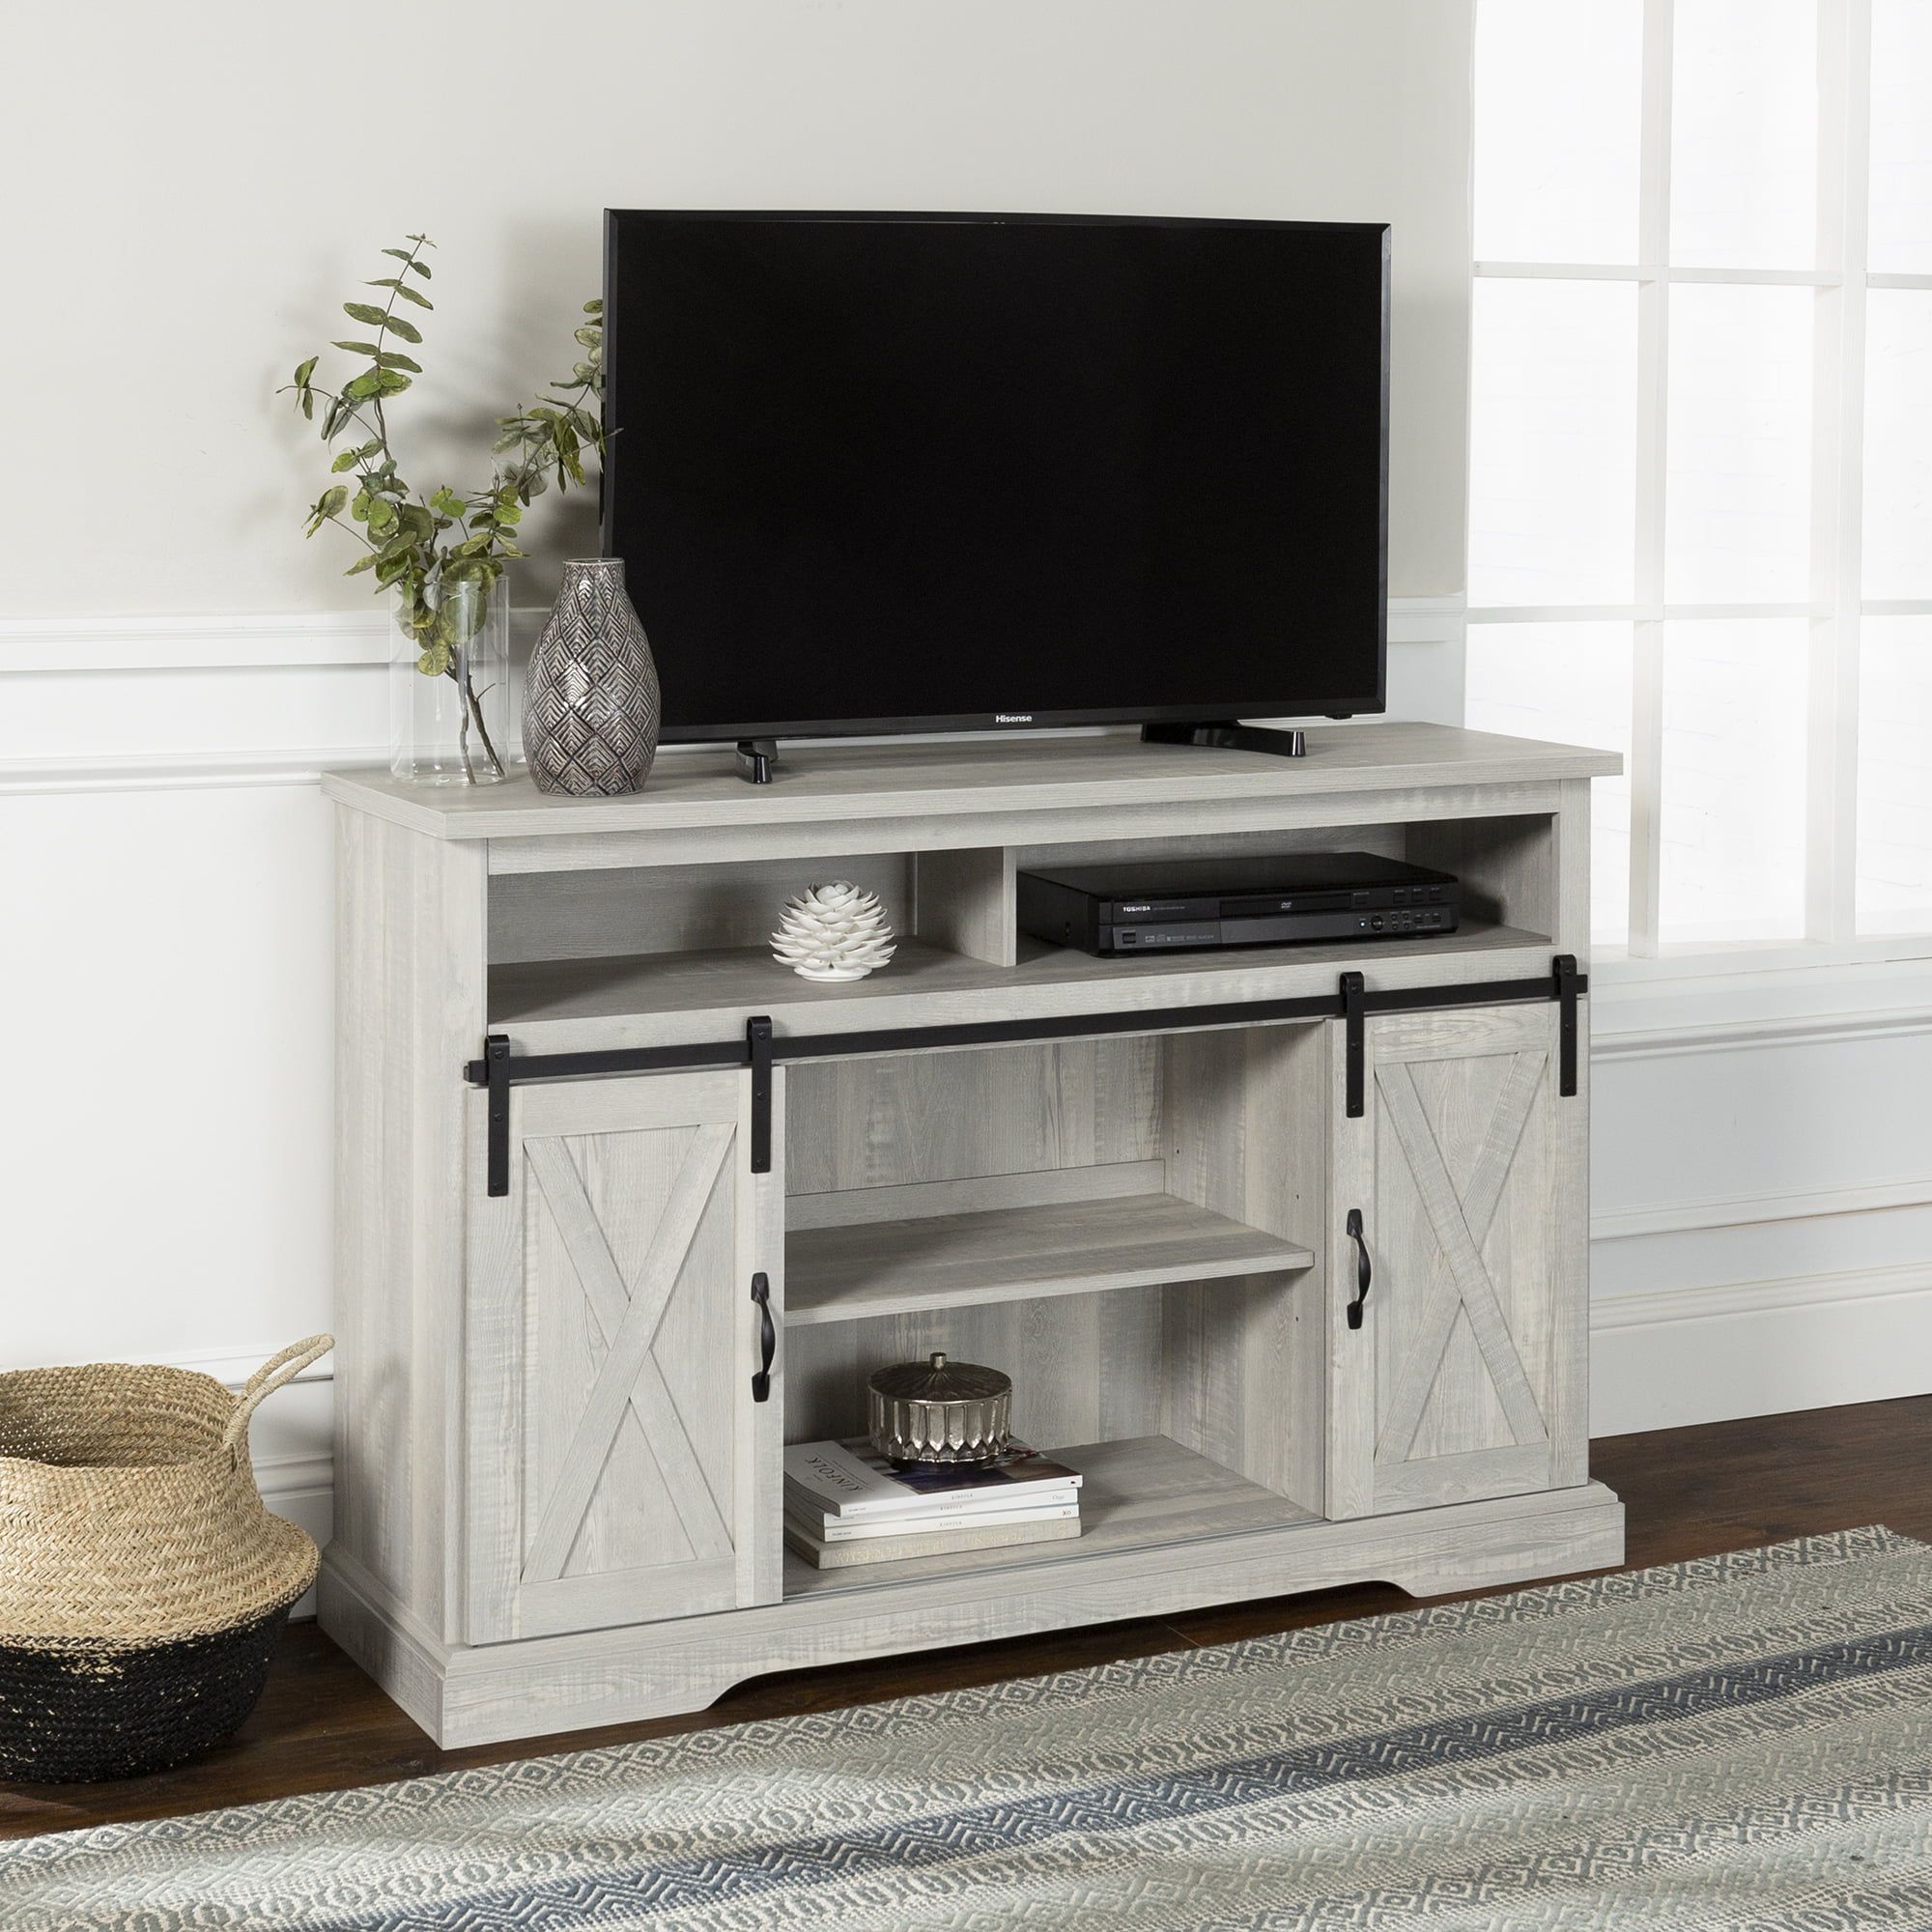 Manor Park Farmhouse Barn Door Tv Stand For Tvs Up To 58", Stone Grey Within Modern Farmhouse Barn Tv Stands (View 19 of 20)